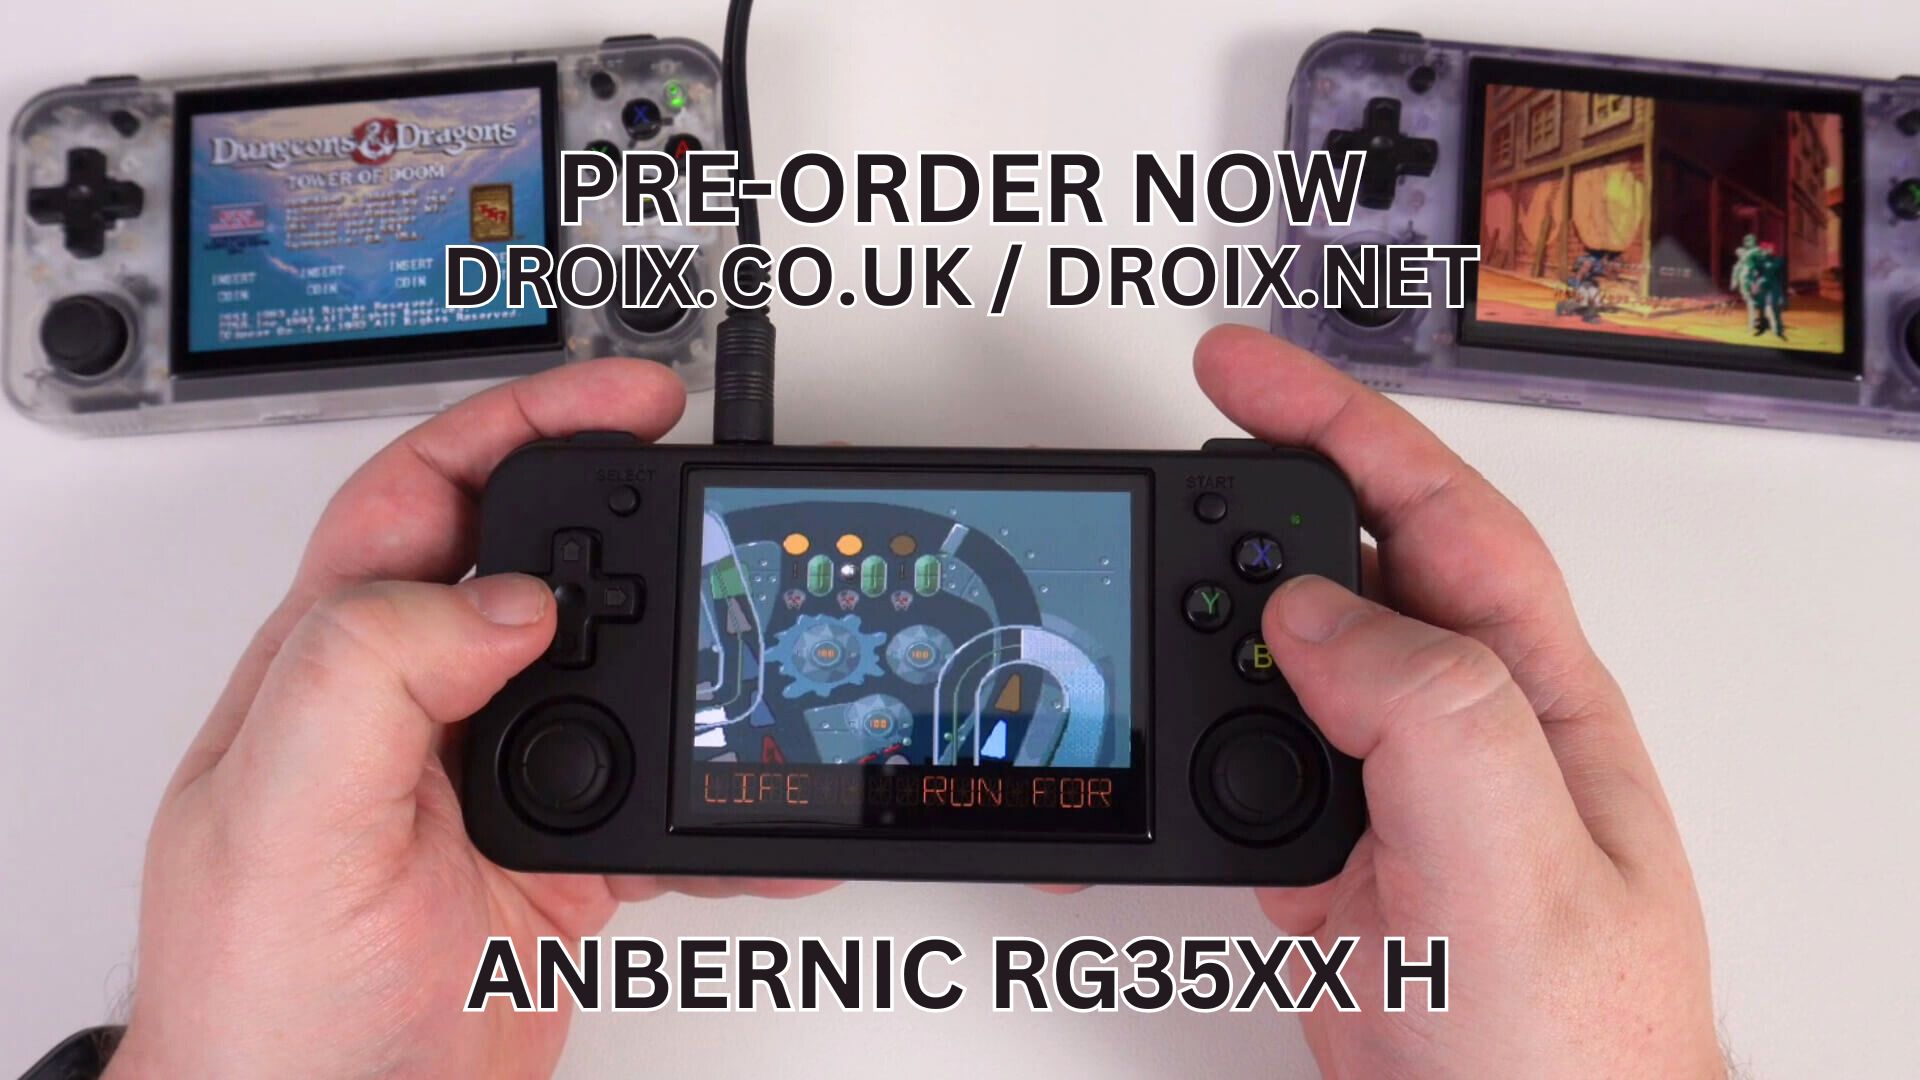 Introducing the Anbernic RG35XX H – Now Available for Pre-Order